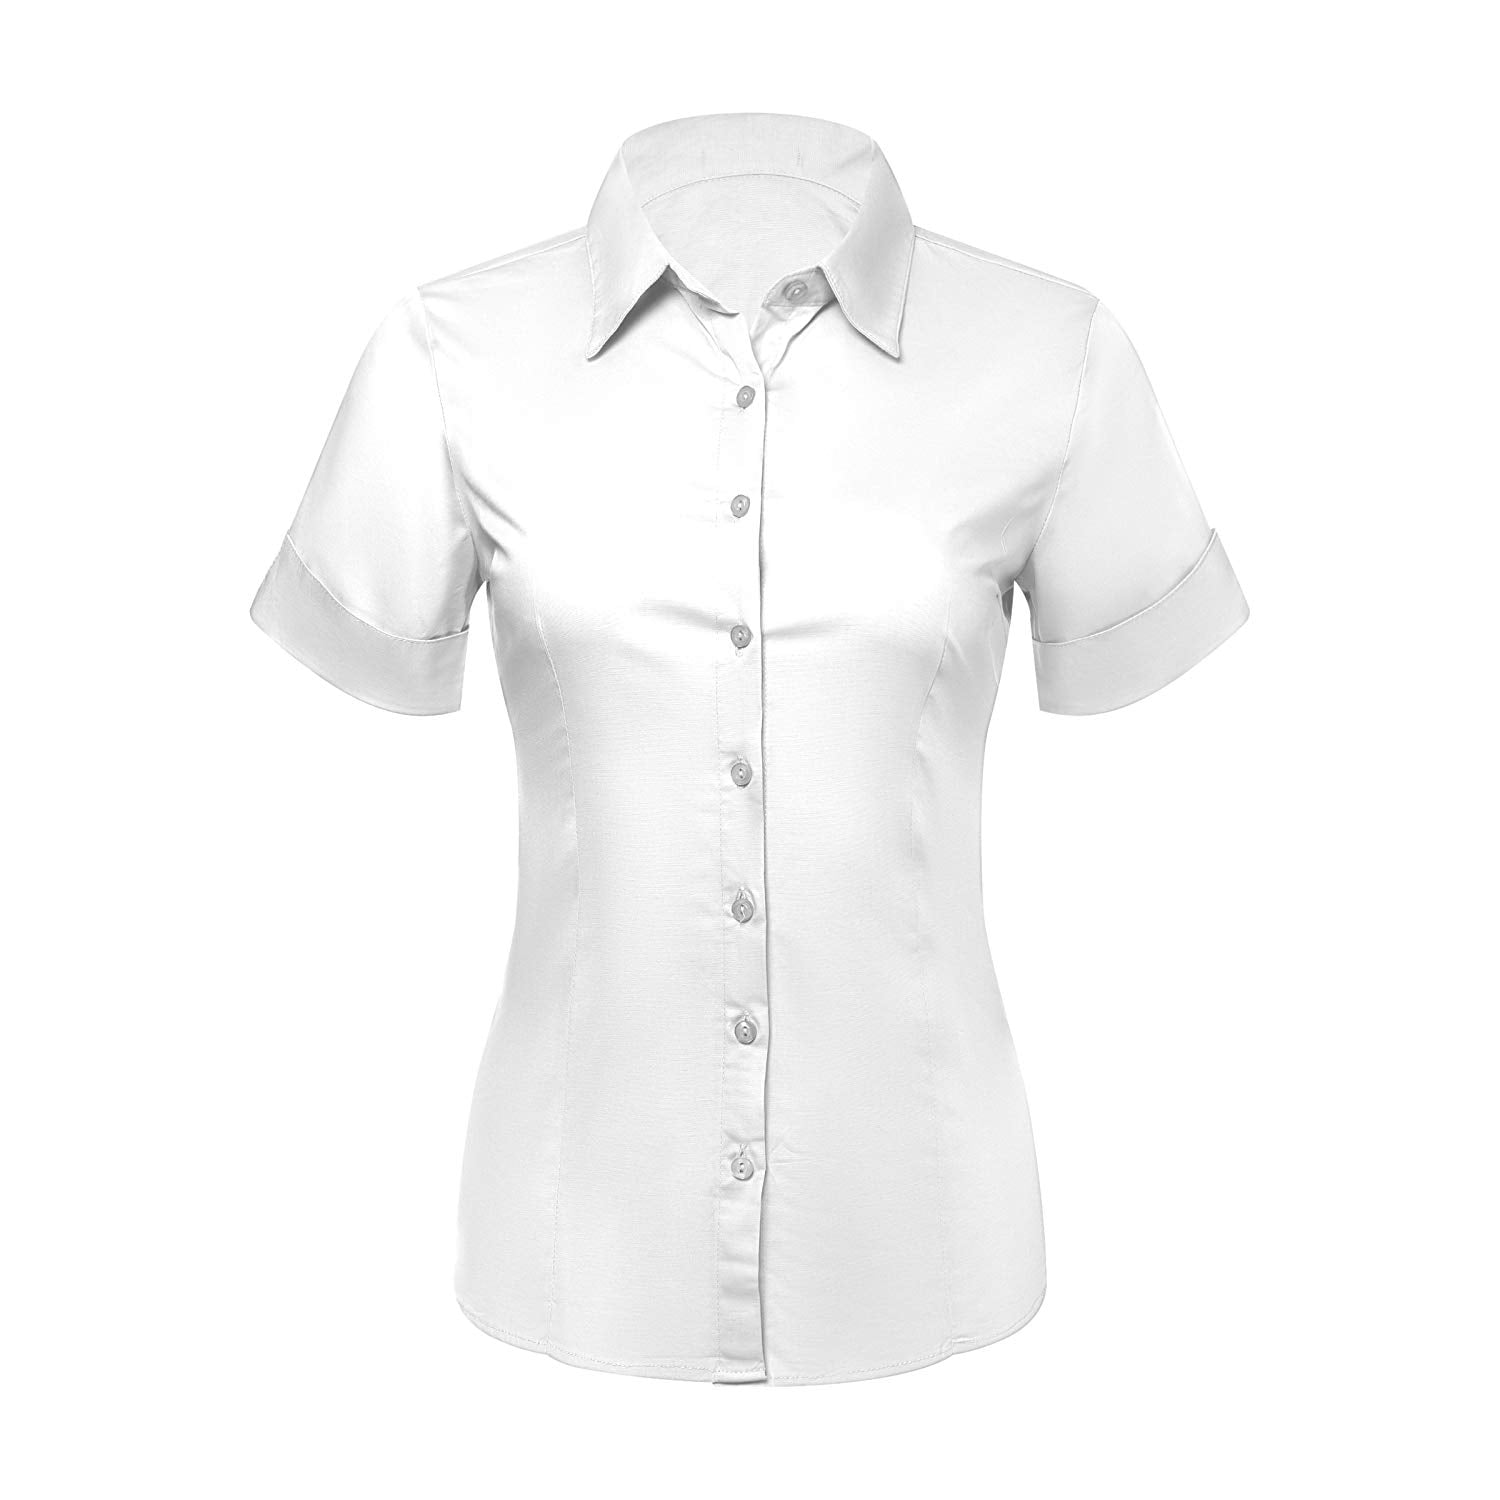 Pier 17 Button Down Shirts for Women, Fitted Short Sleeve Tailored ...